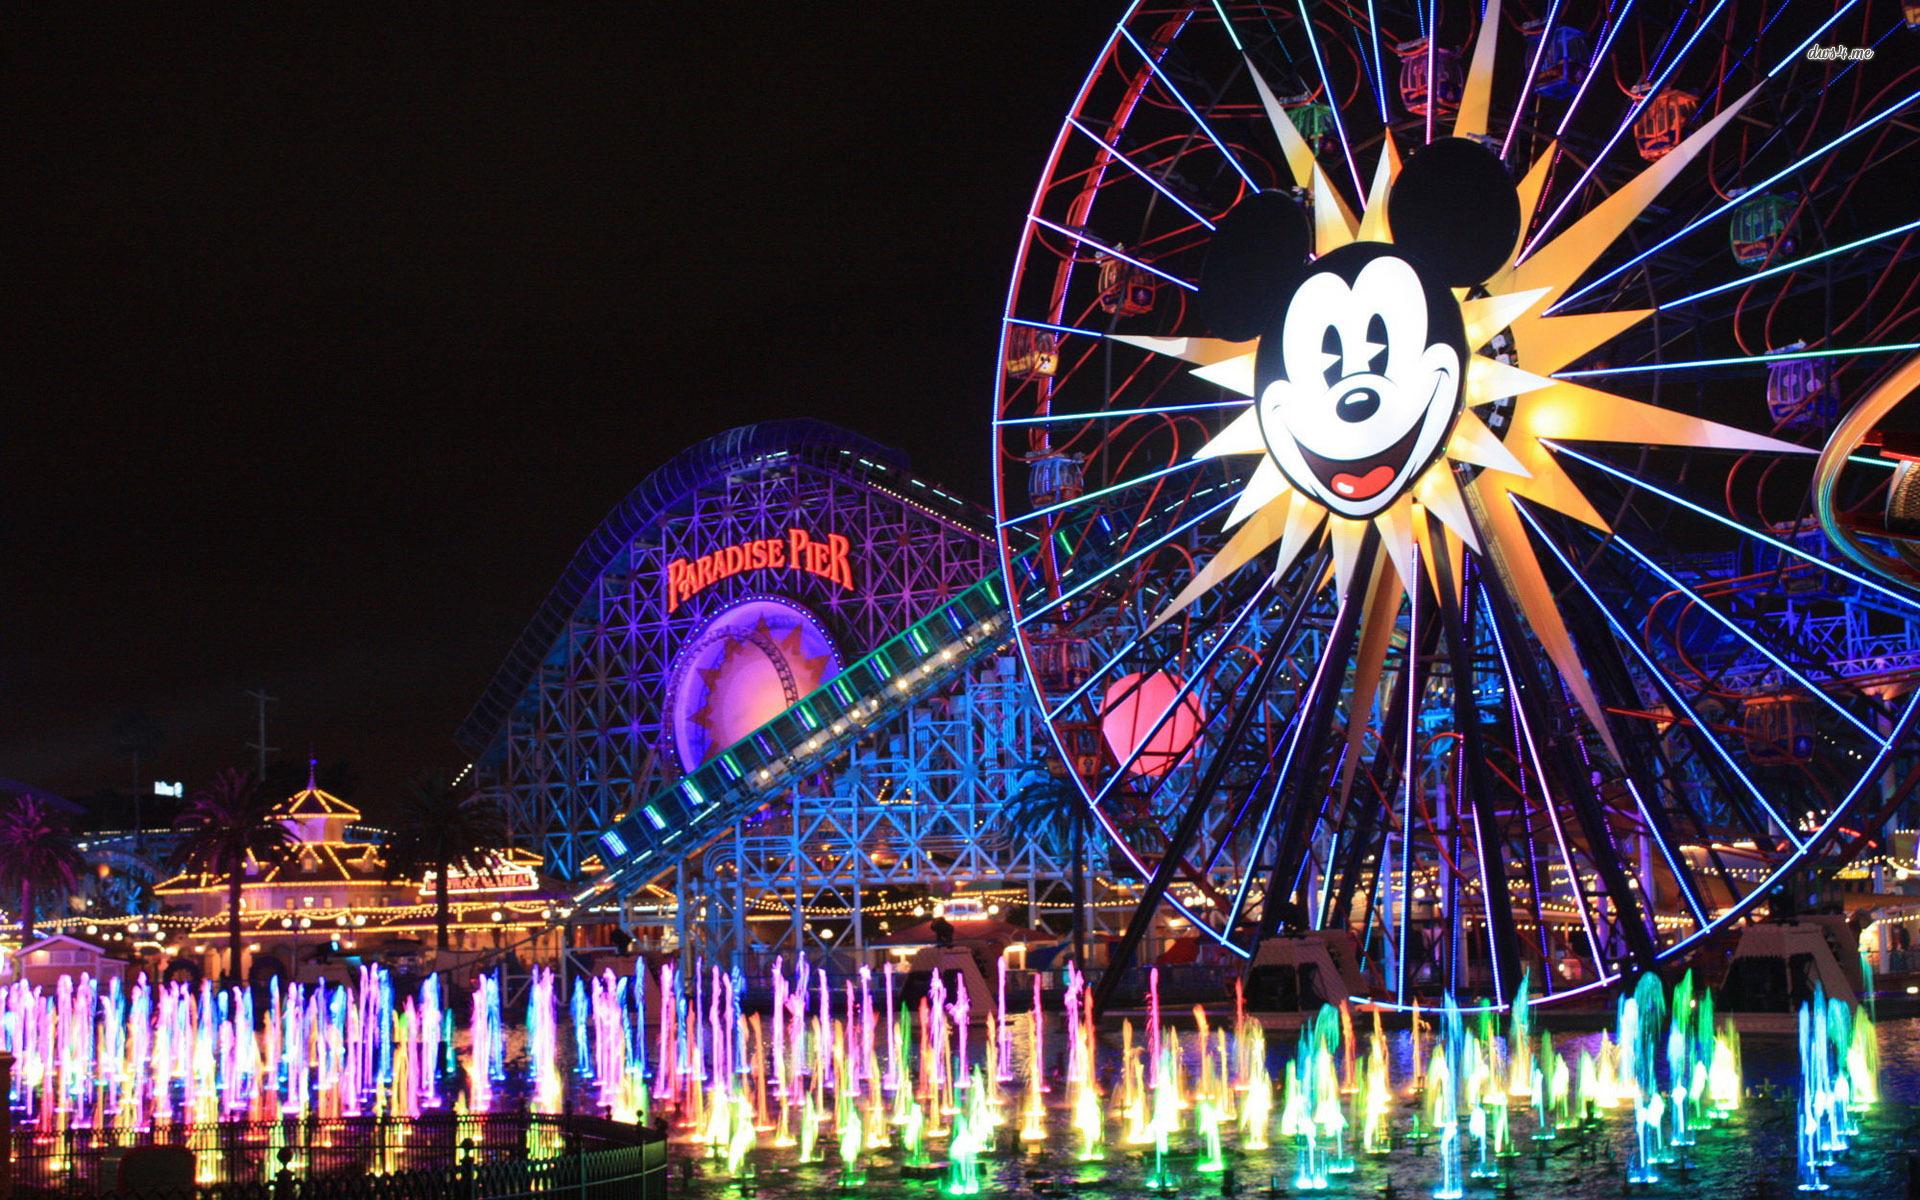 A ferris wheel with lights and water - Disneyland